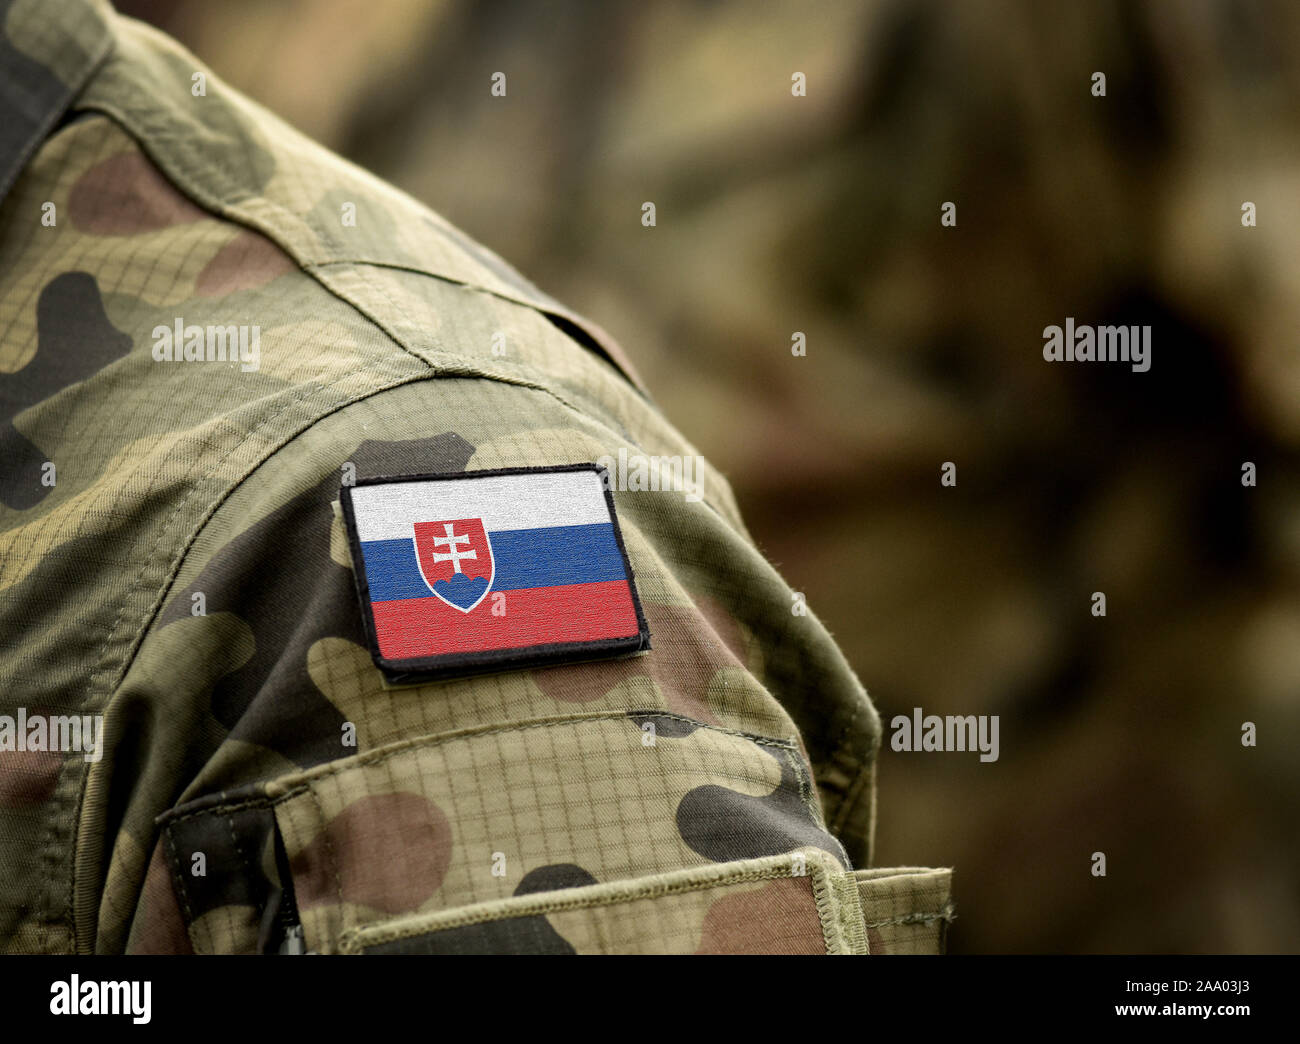 Flag of Slovakia on military uniform. Army, armed forces, soldiers. Collage. Stock Photo